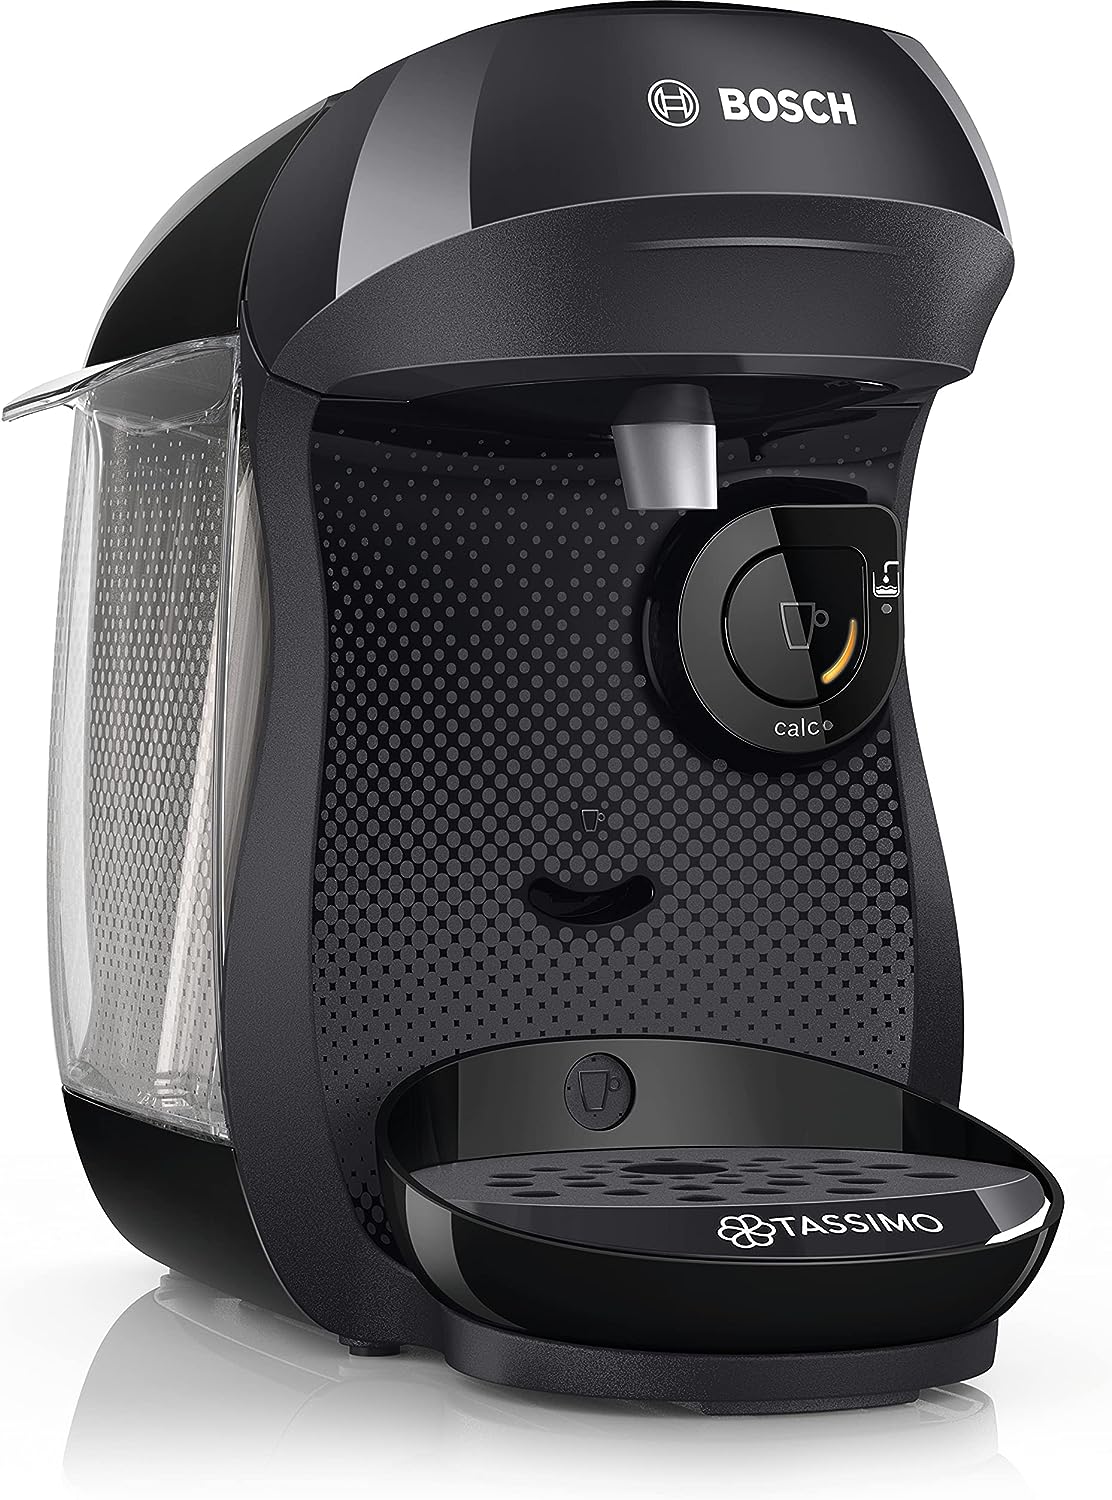 Bosch Tassimo Happy Capsule Machine TAS1002N, Coffee Machine by Bosch, Over 70 Drinks, Fully Automatic, Suitable for All Cups, Space-Saving, 1400 W, Black/Anthracite